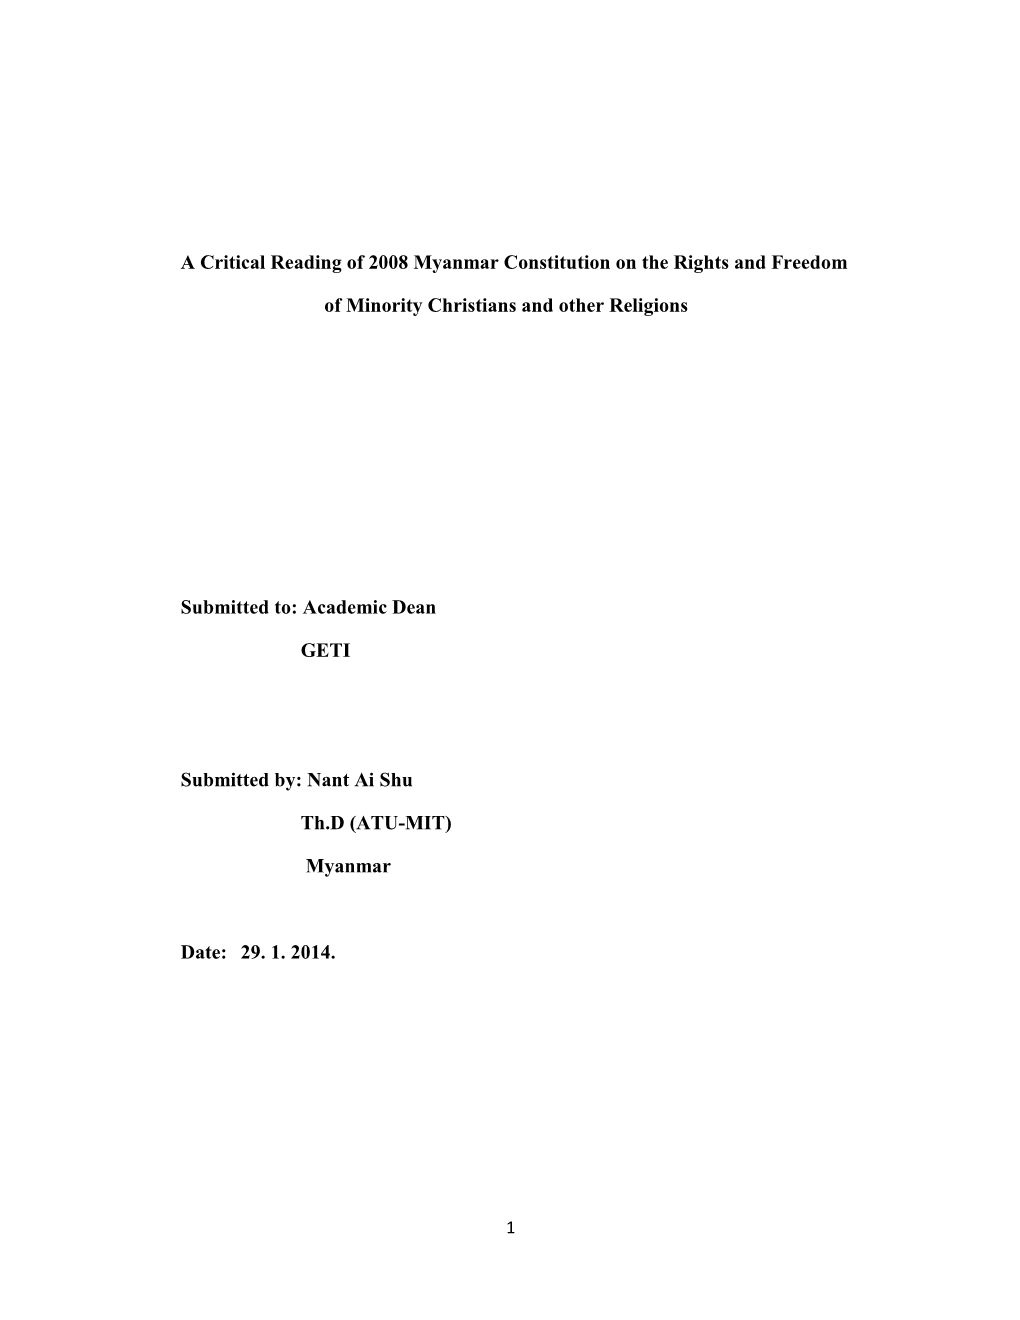 A Critical Reading of 2008 Myanmar Constitution on the Rights and Freedom